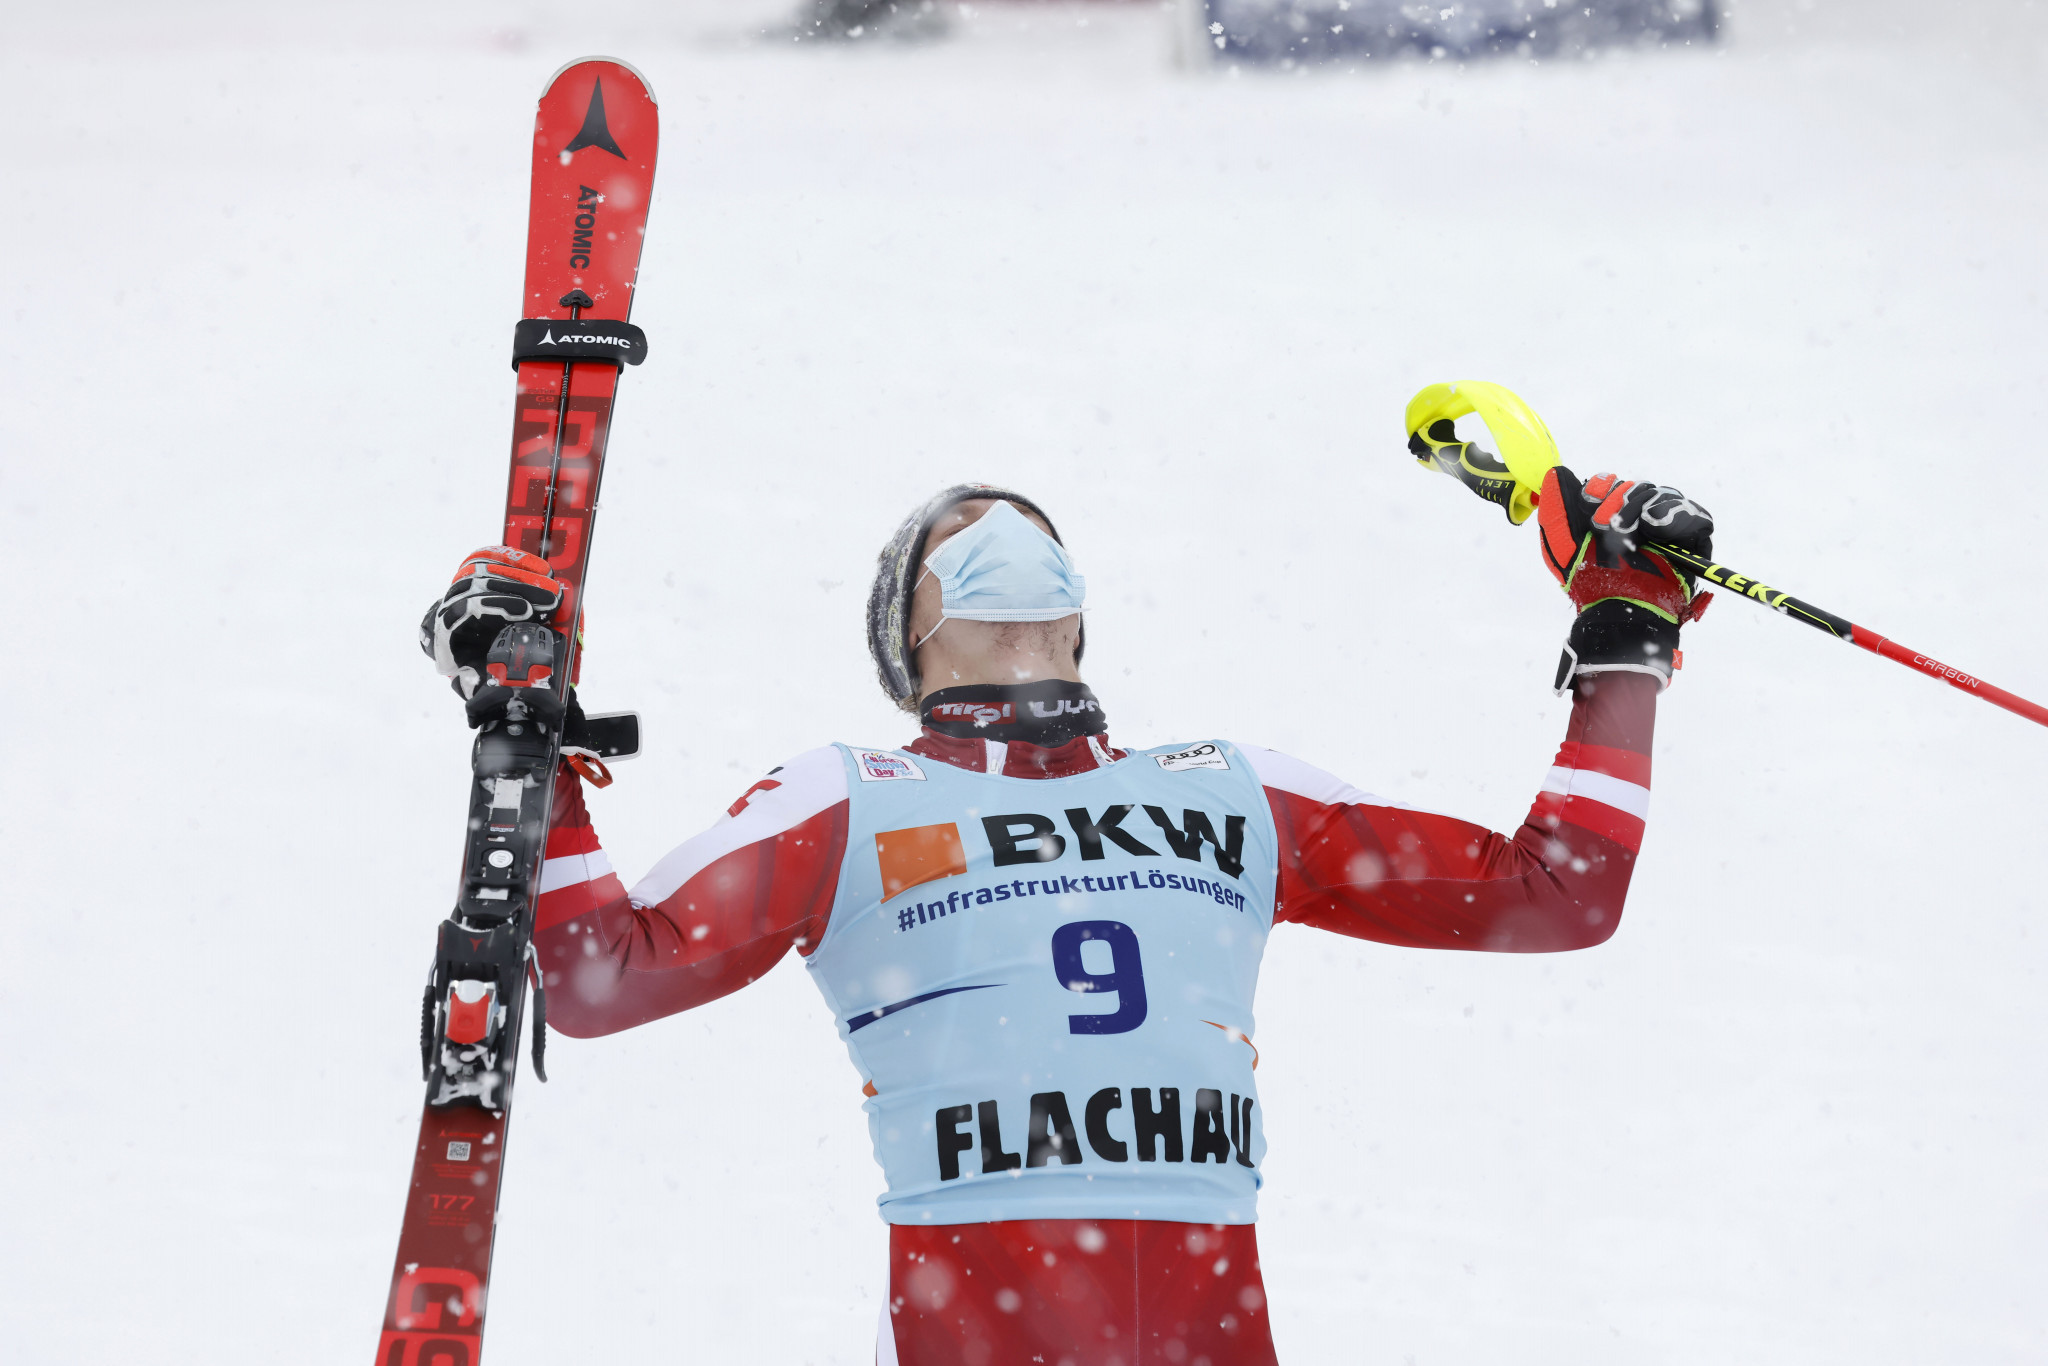 Manuel Feller recorded a maiden World Cup victory in Flachau ©Getty Images